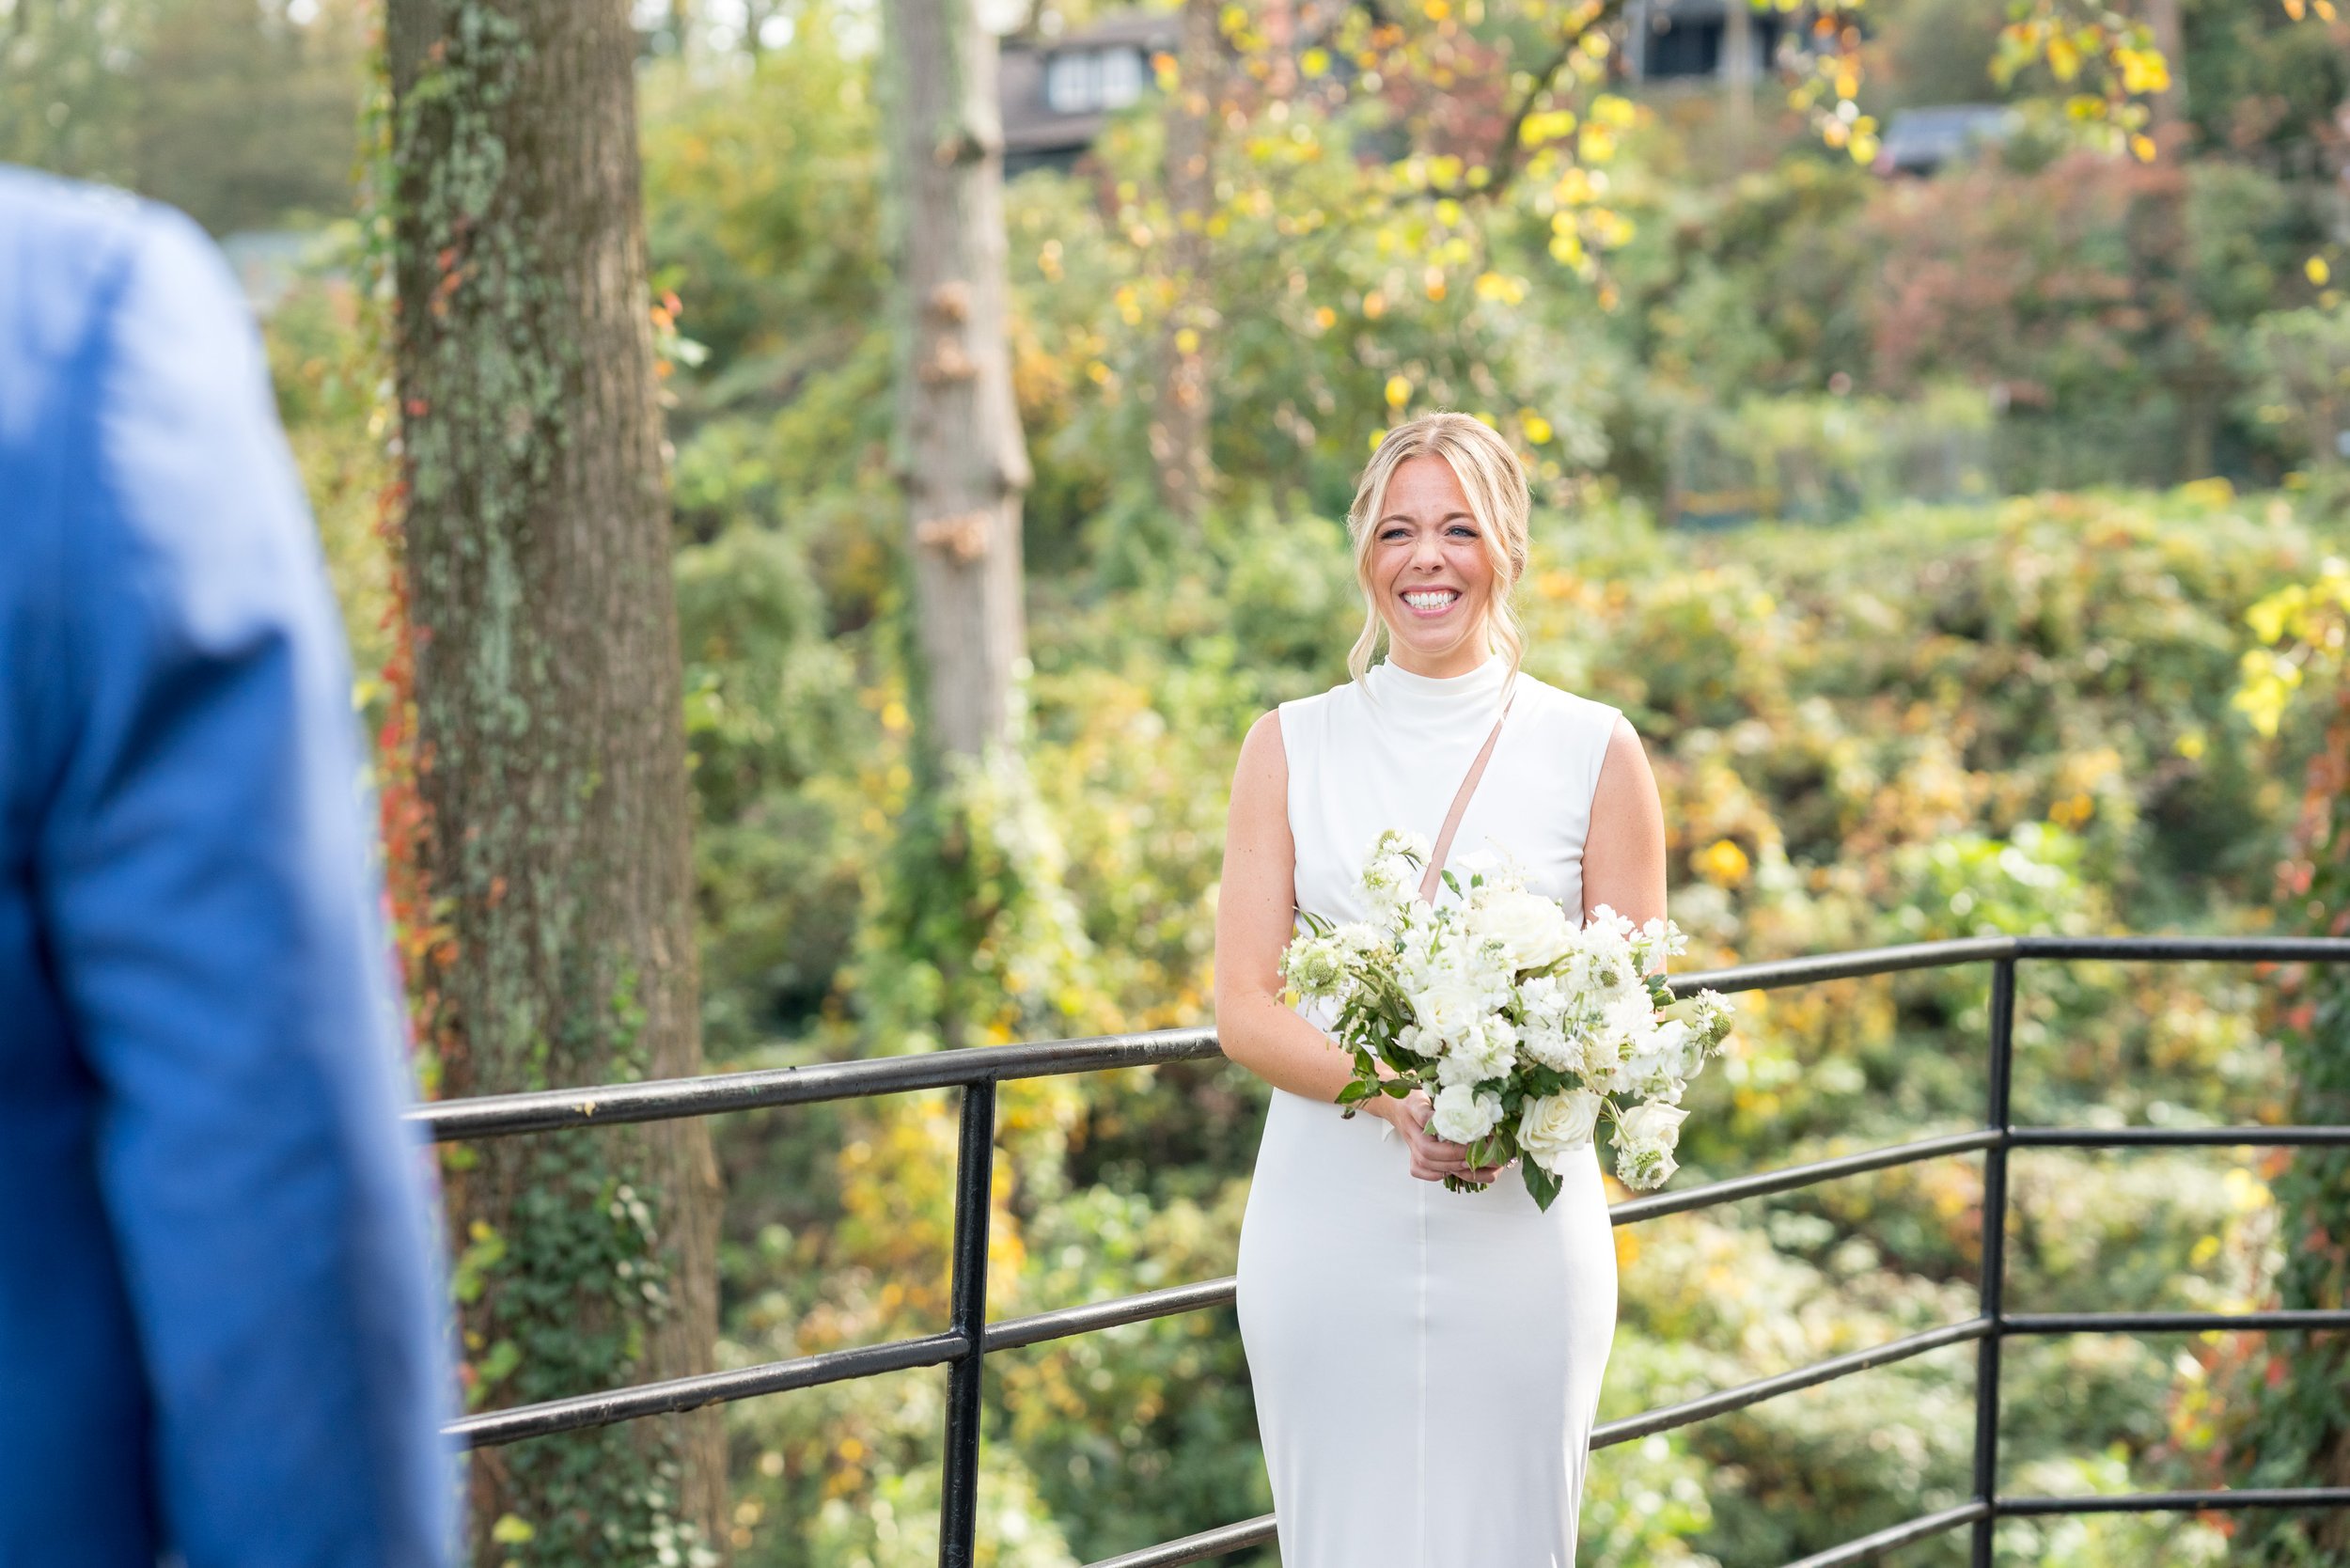 Bride smiles at groom holding flowers wearing white Tom Ford wedding dress